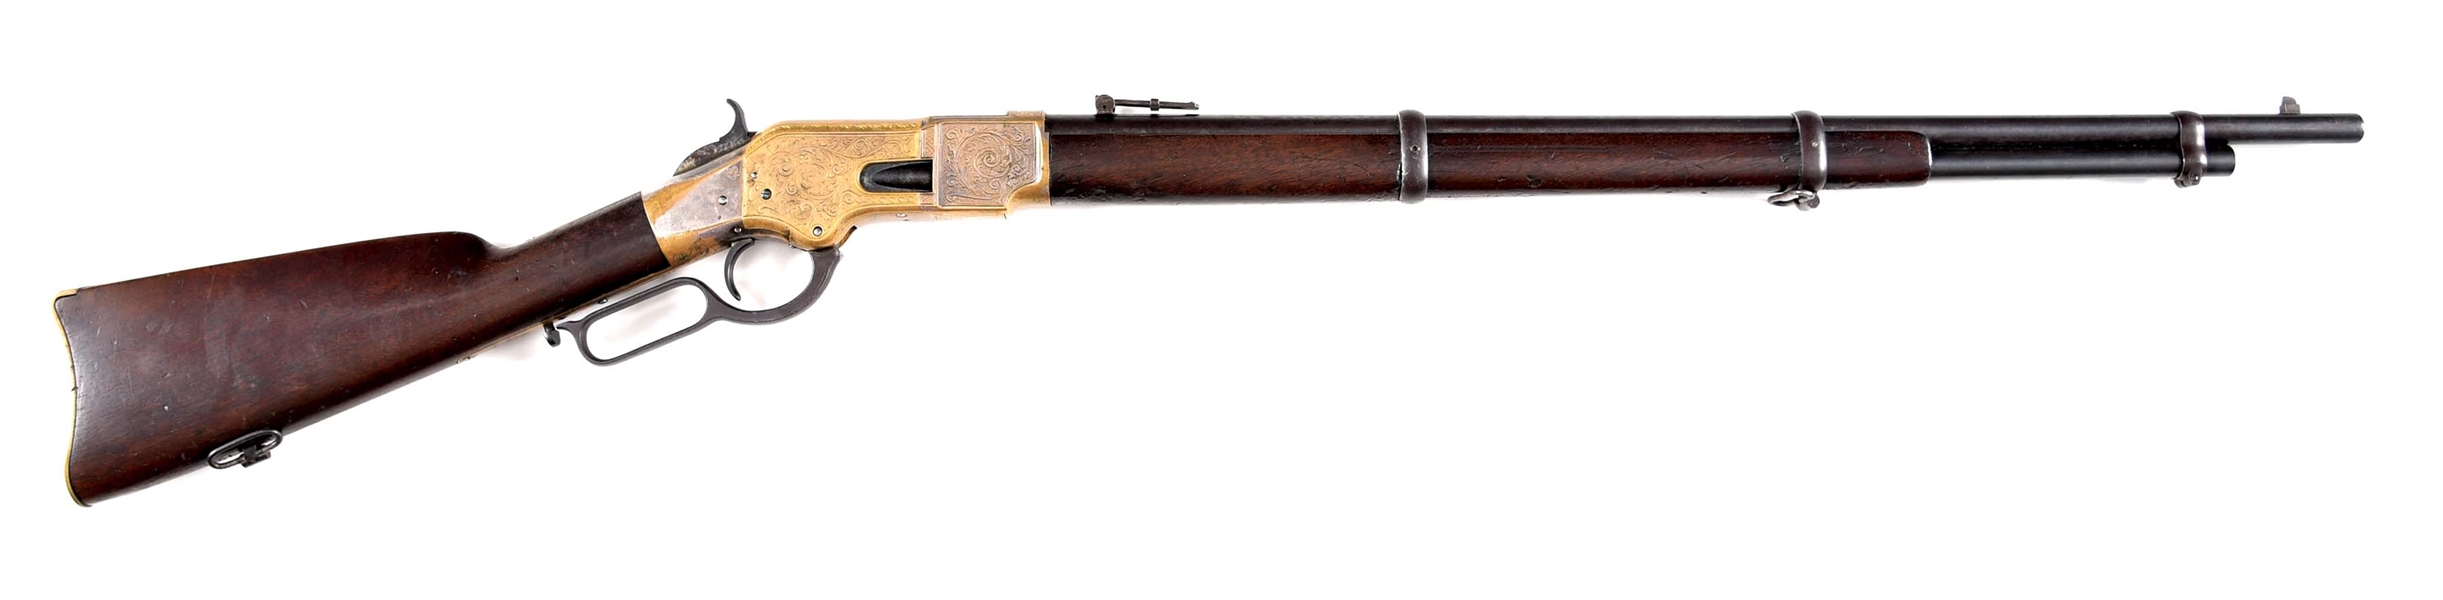 (A) PERIOD ENGRAVED WINCHESTER MODEL 1866 MUSKET